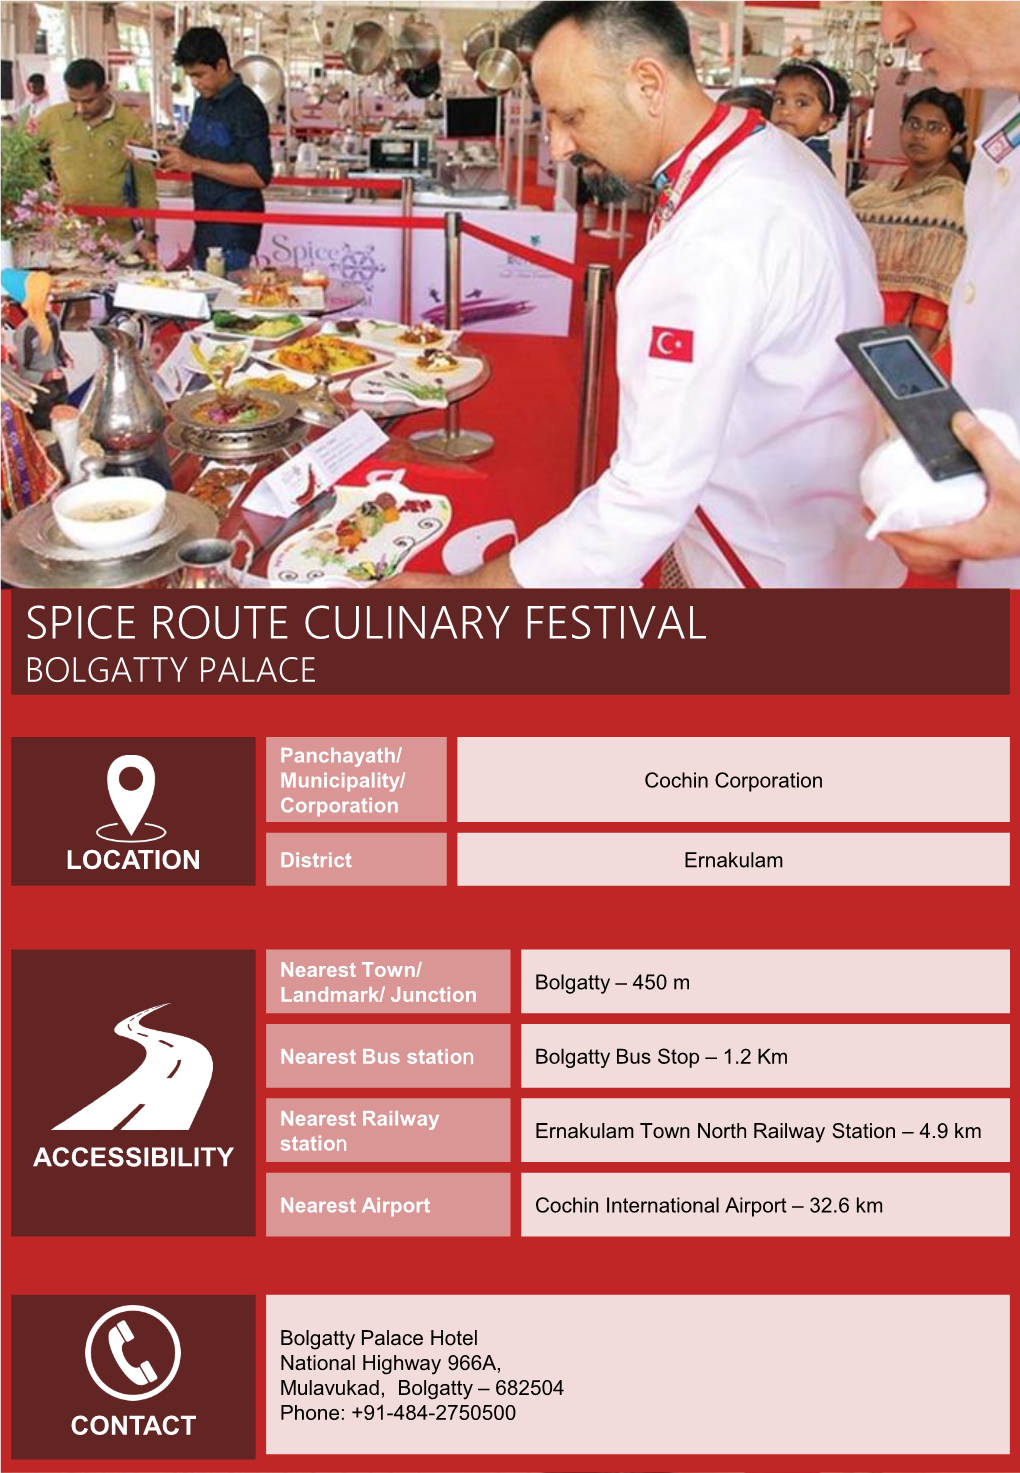 Spice Route Culinary Festival Bolgatty Palace